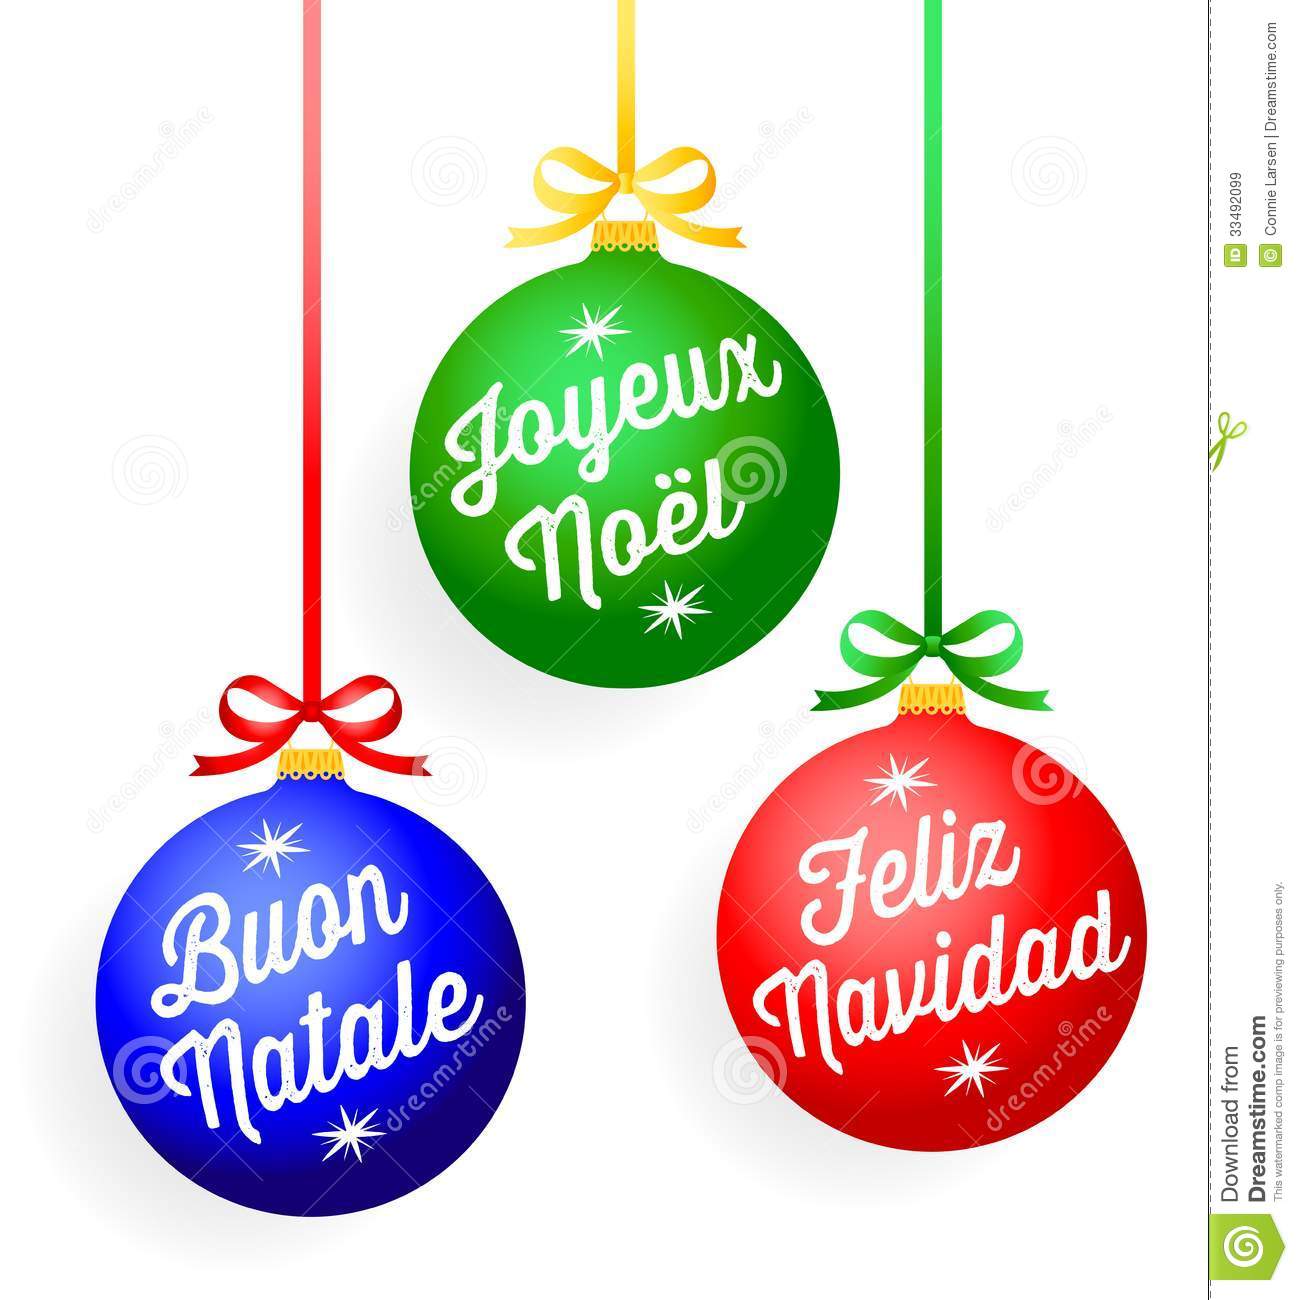 Of Colorful Christmas Ornaments With Lettered Greetings In Languages